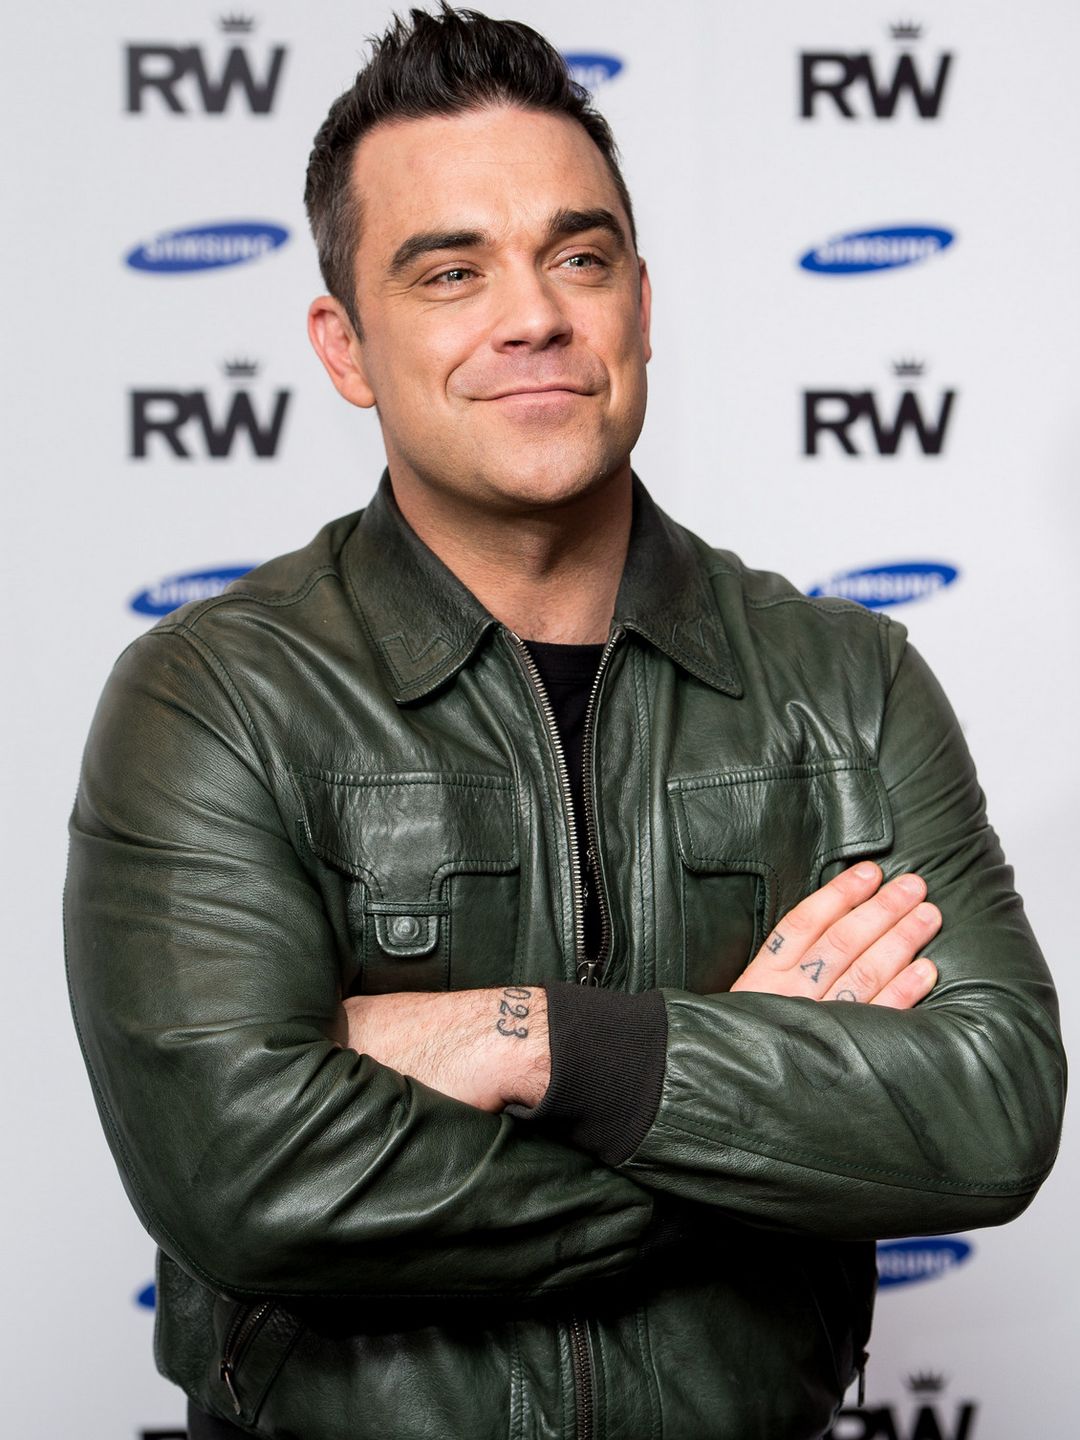 Robbie Williams does he have a wife